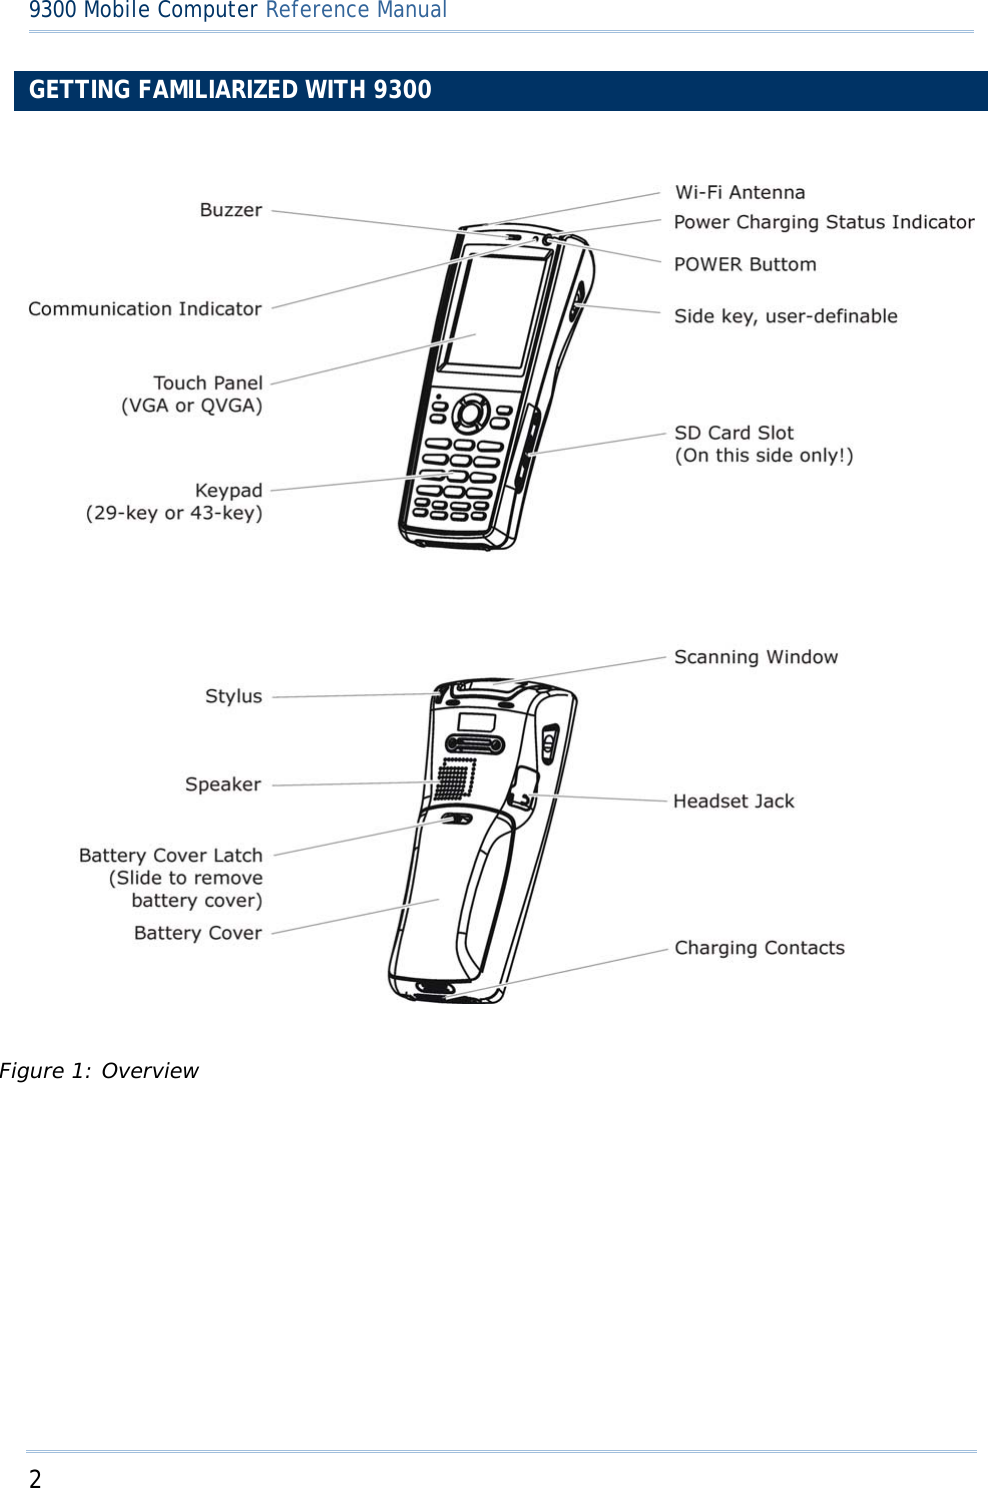 2  9300 Mobile Computer Reference Manual  GETTING FAMILIARIZED WITH 9300     Figure 1: Overview   